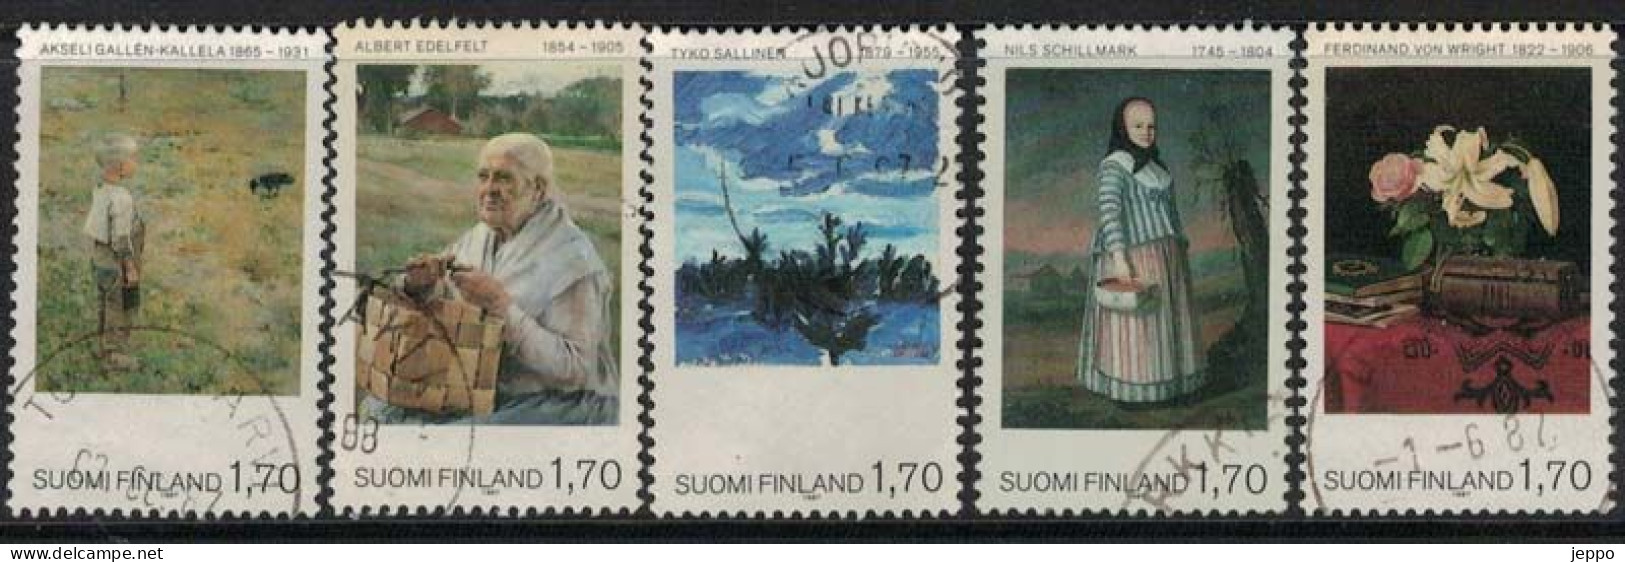 1987 Finland, Ateneum Art Museum Complete Used Set. - Used Stamps